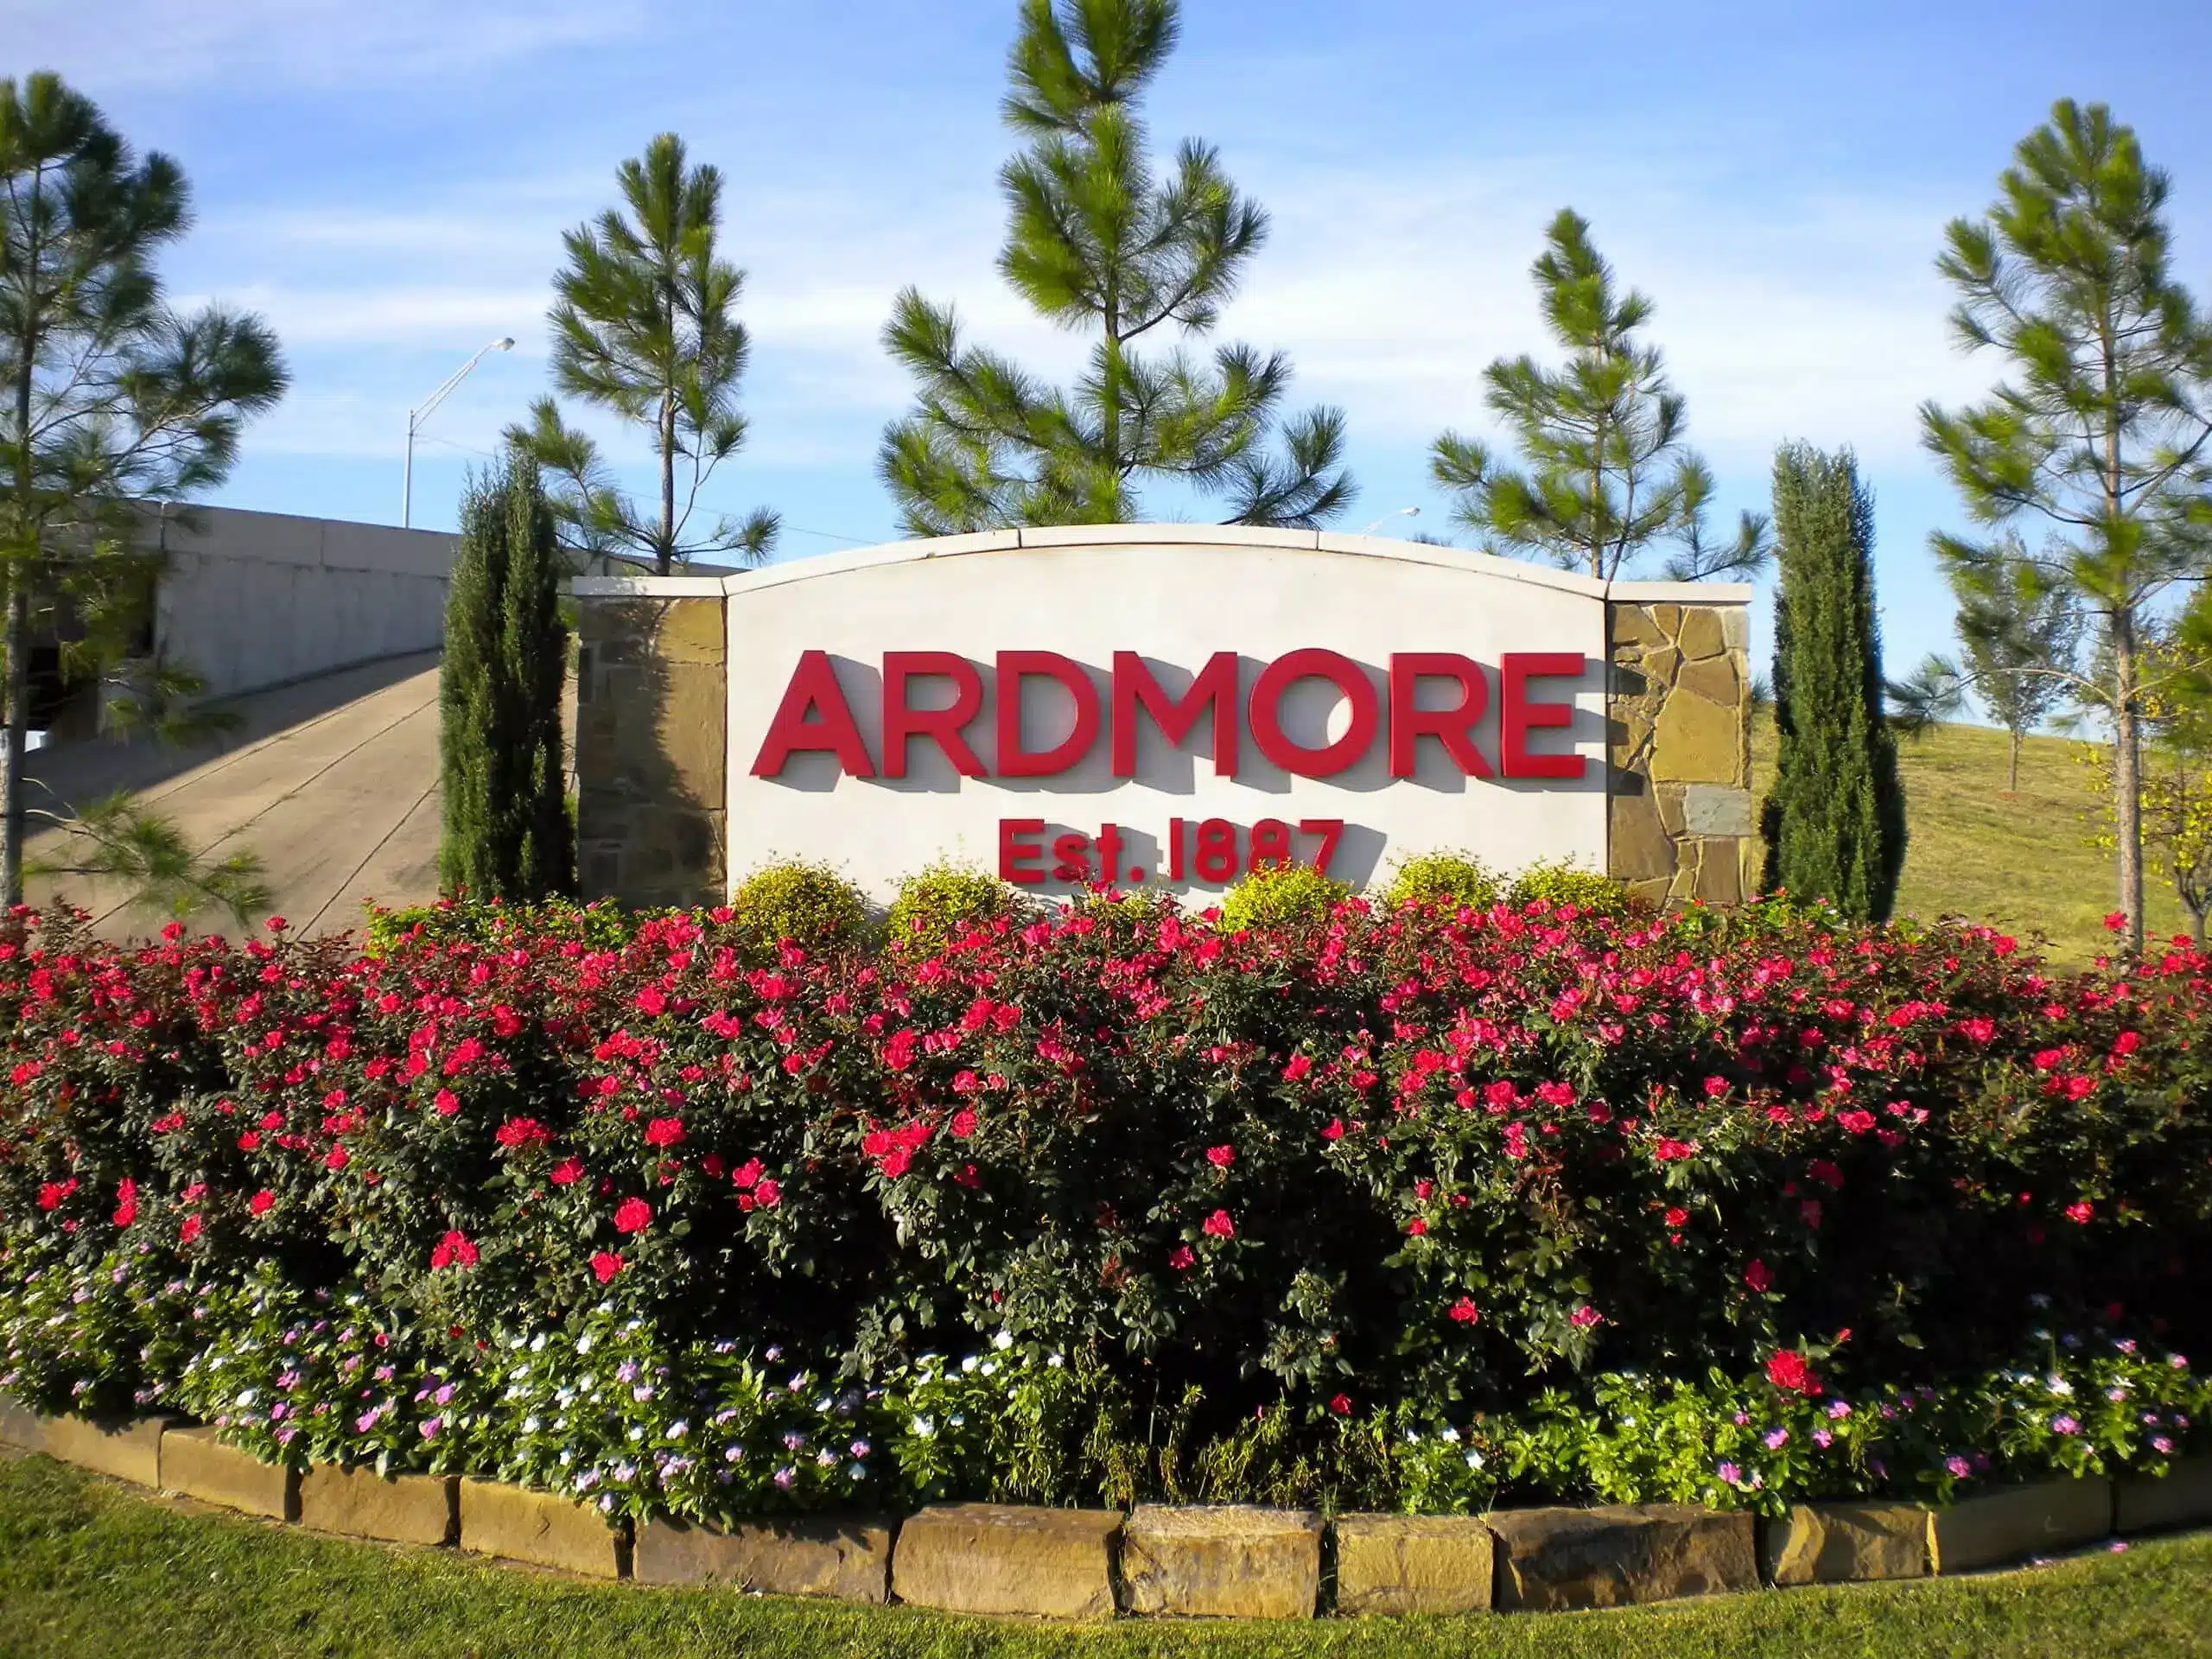 10 Interesting Facts About Ardmore, Oklahoma